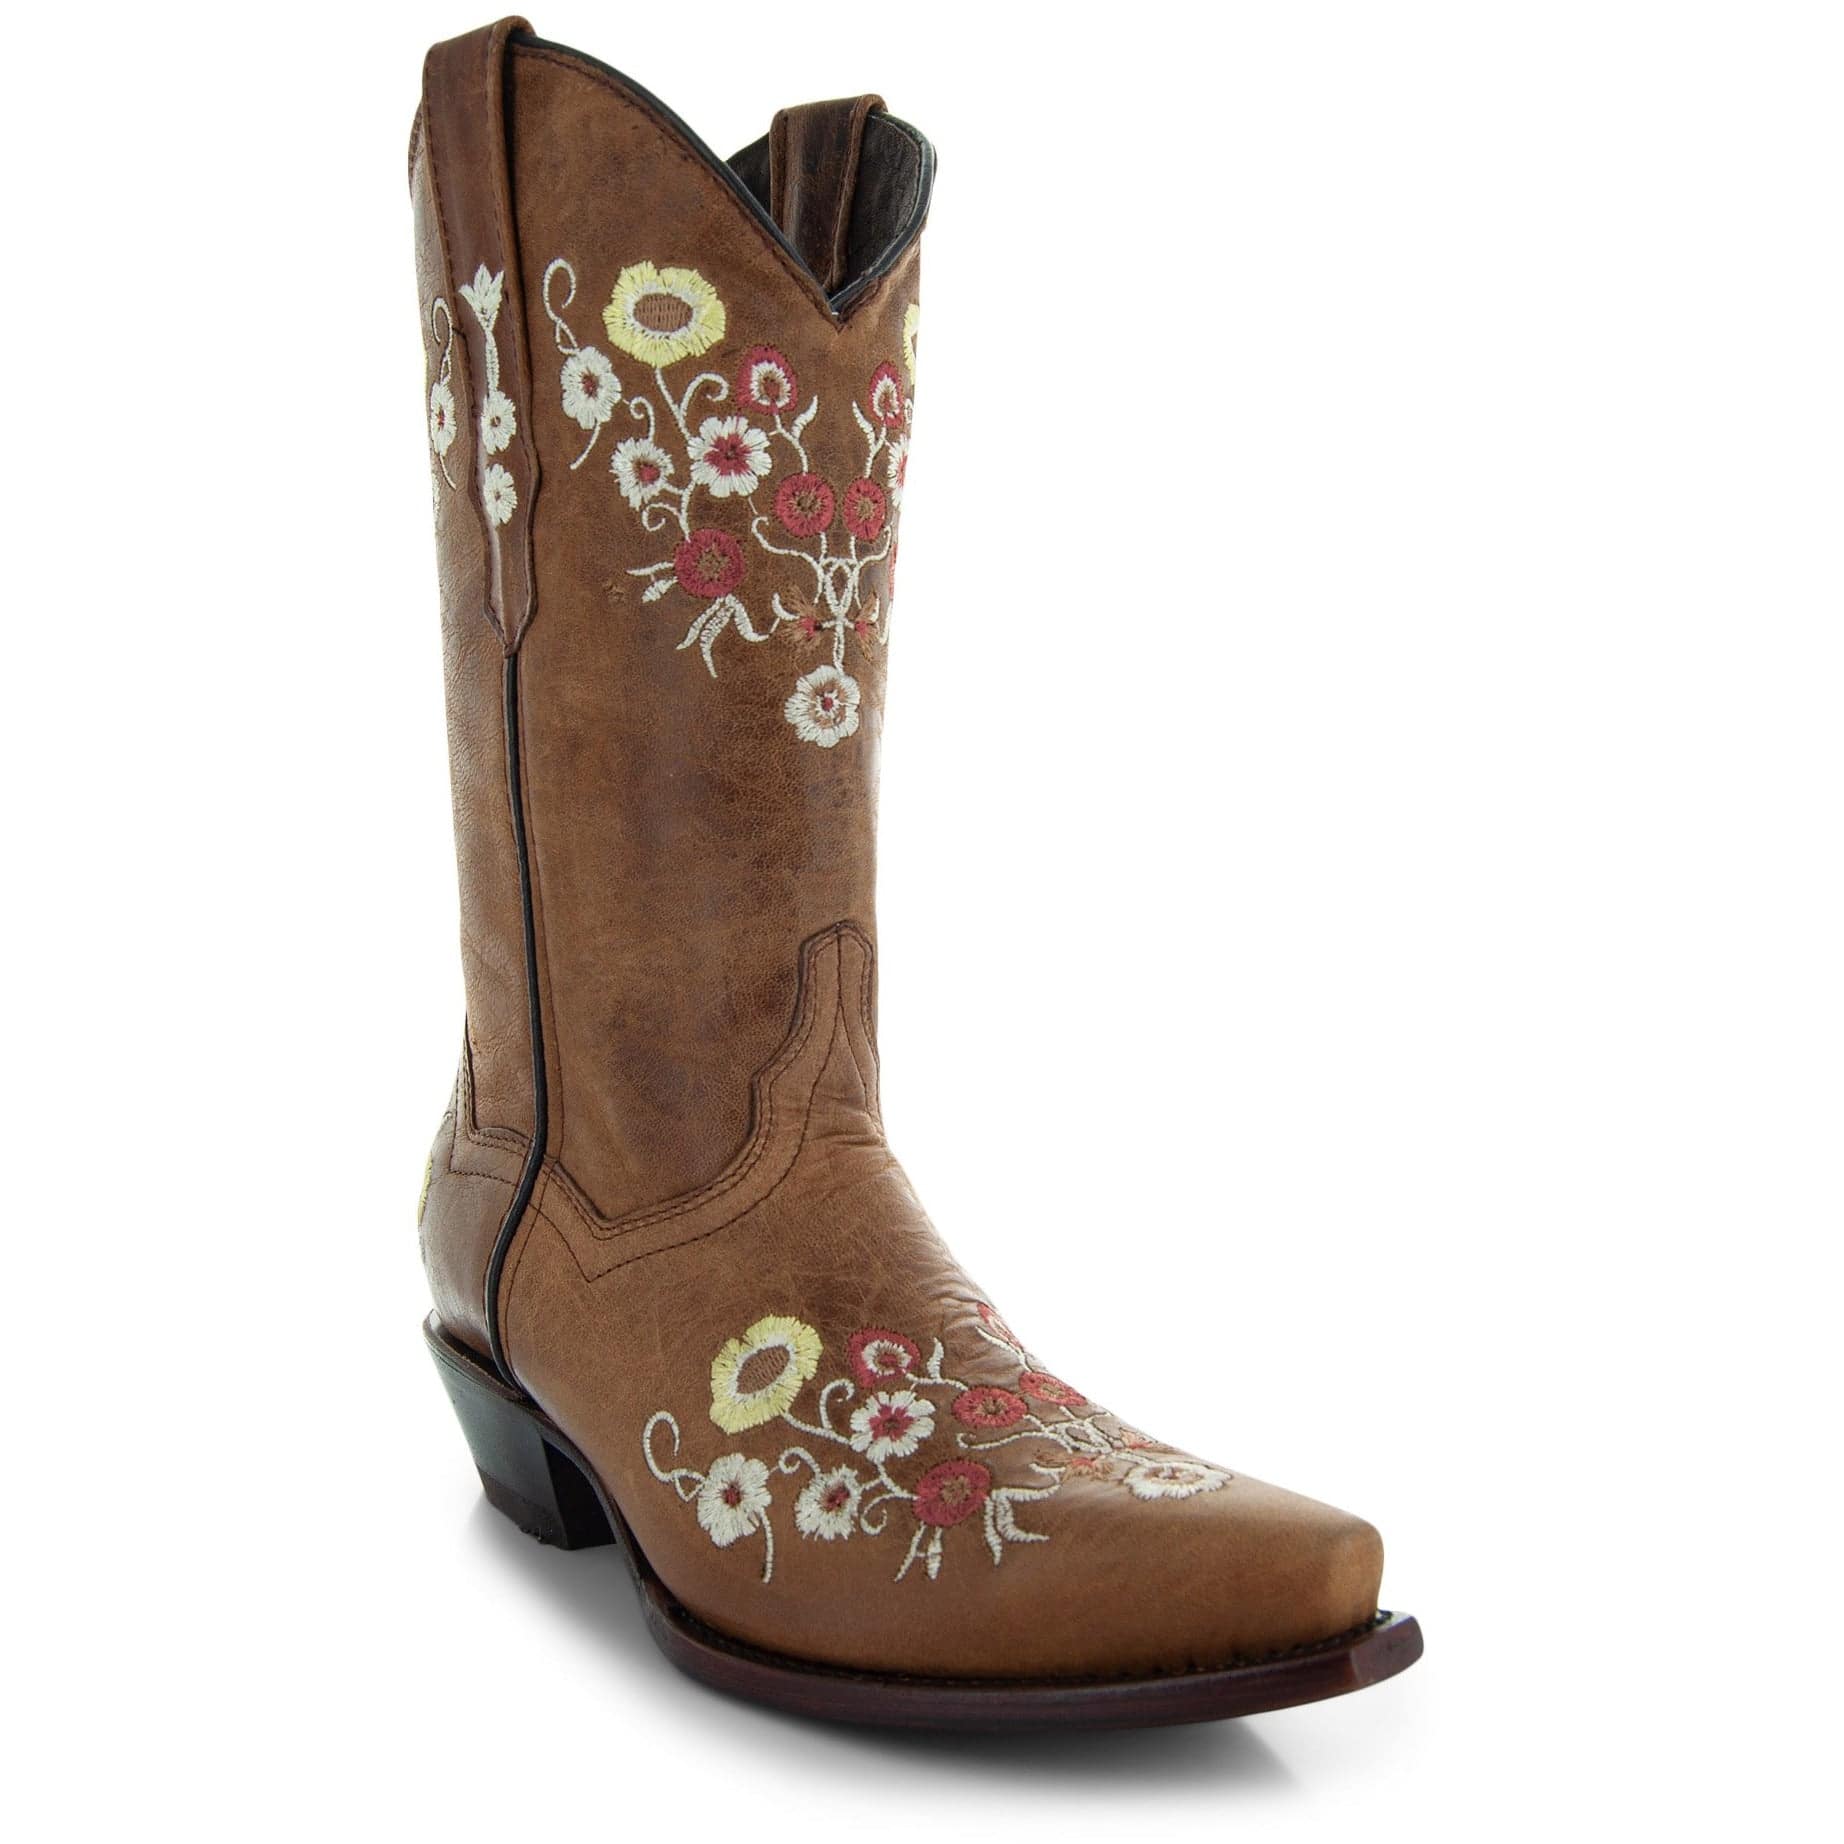 Genuine Leather Cowboy Boots - Cowgirl Boots – Don Max Western